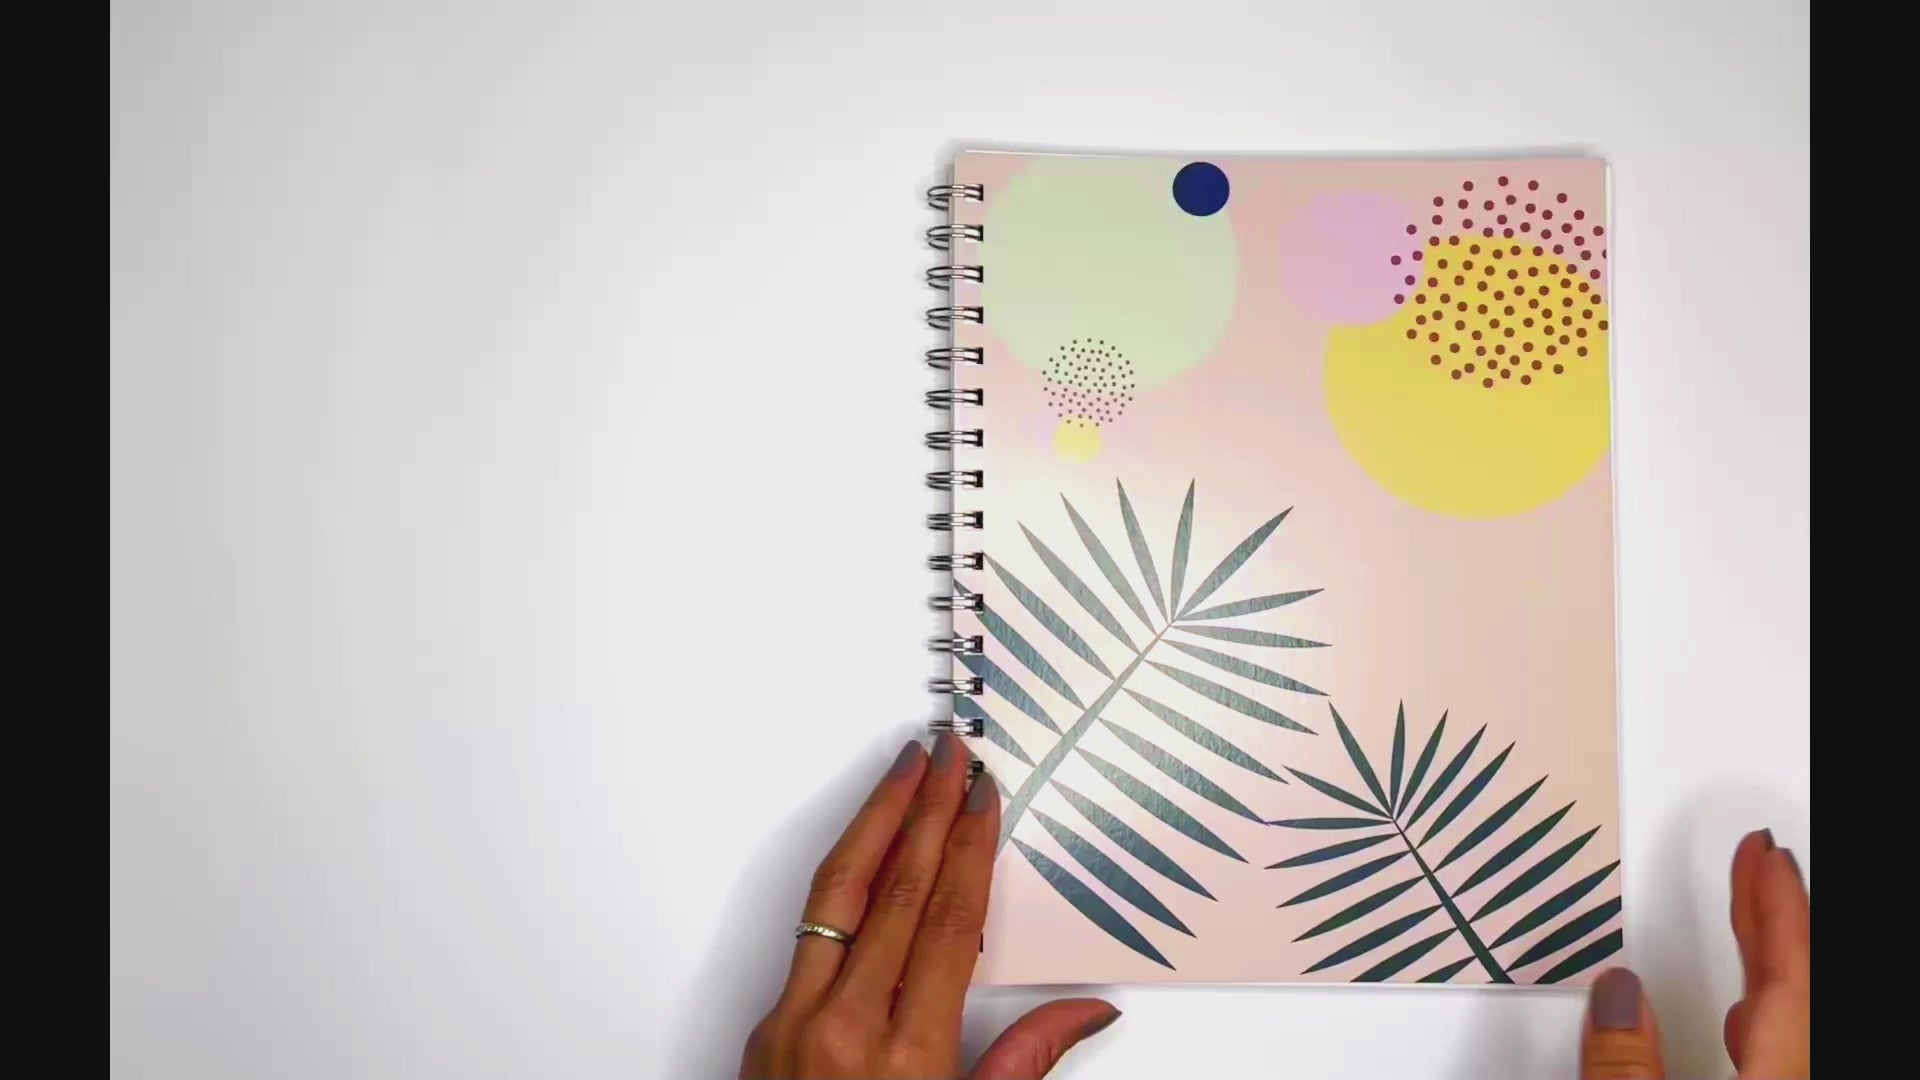 Video of contents of journal